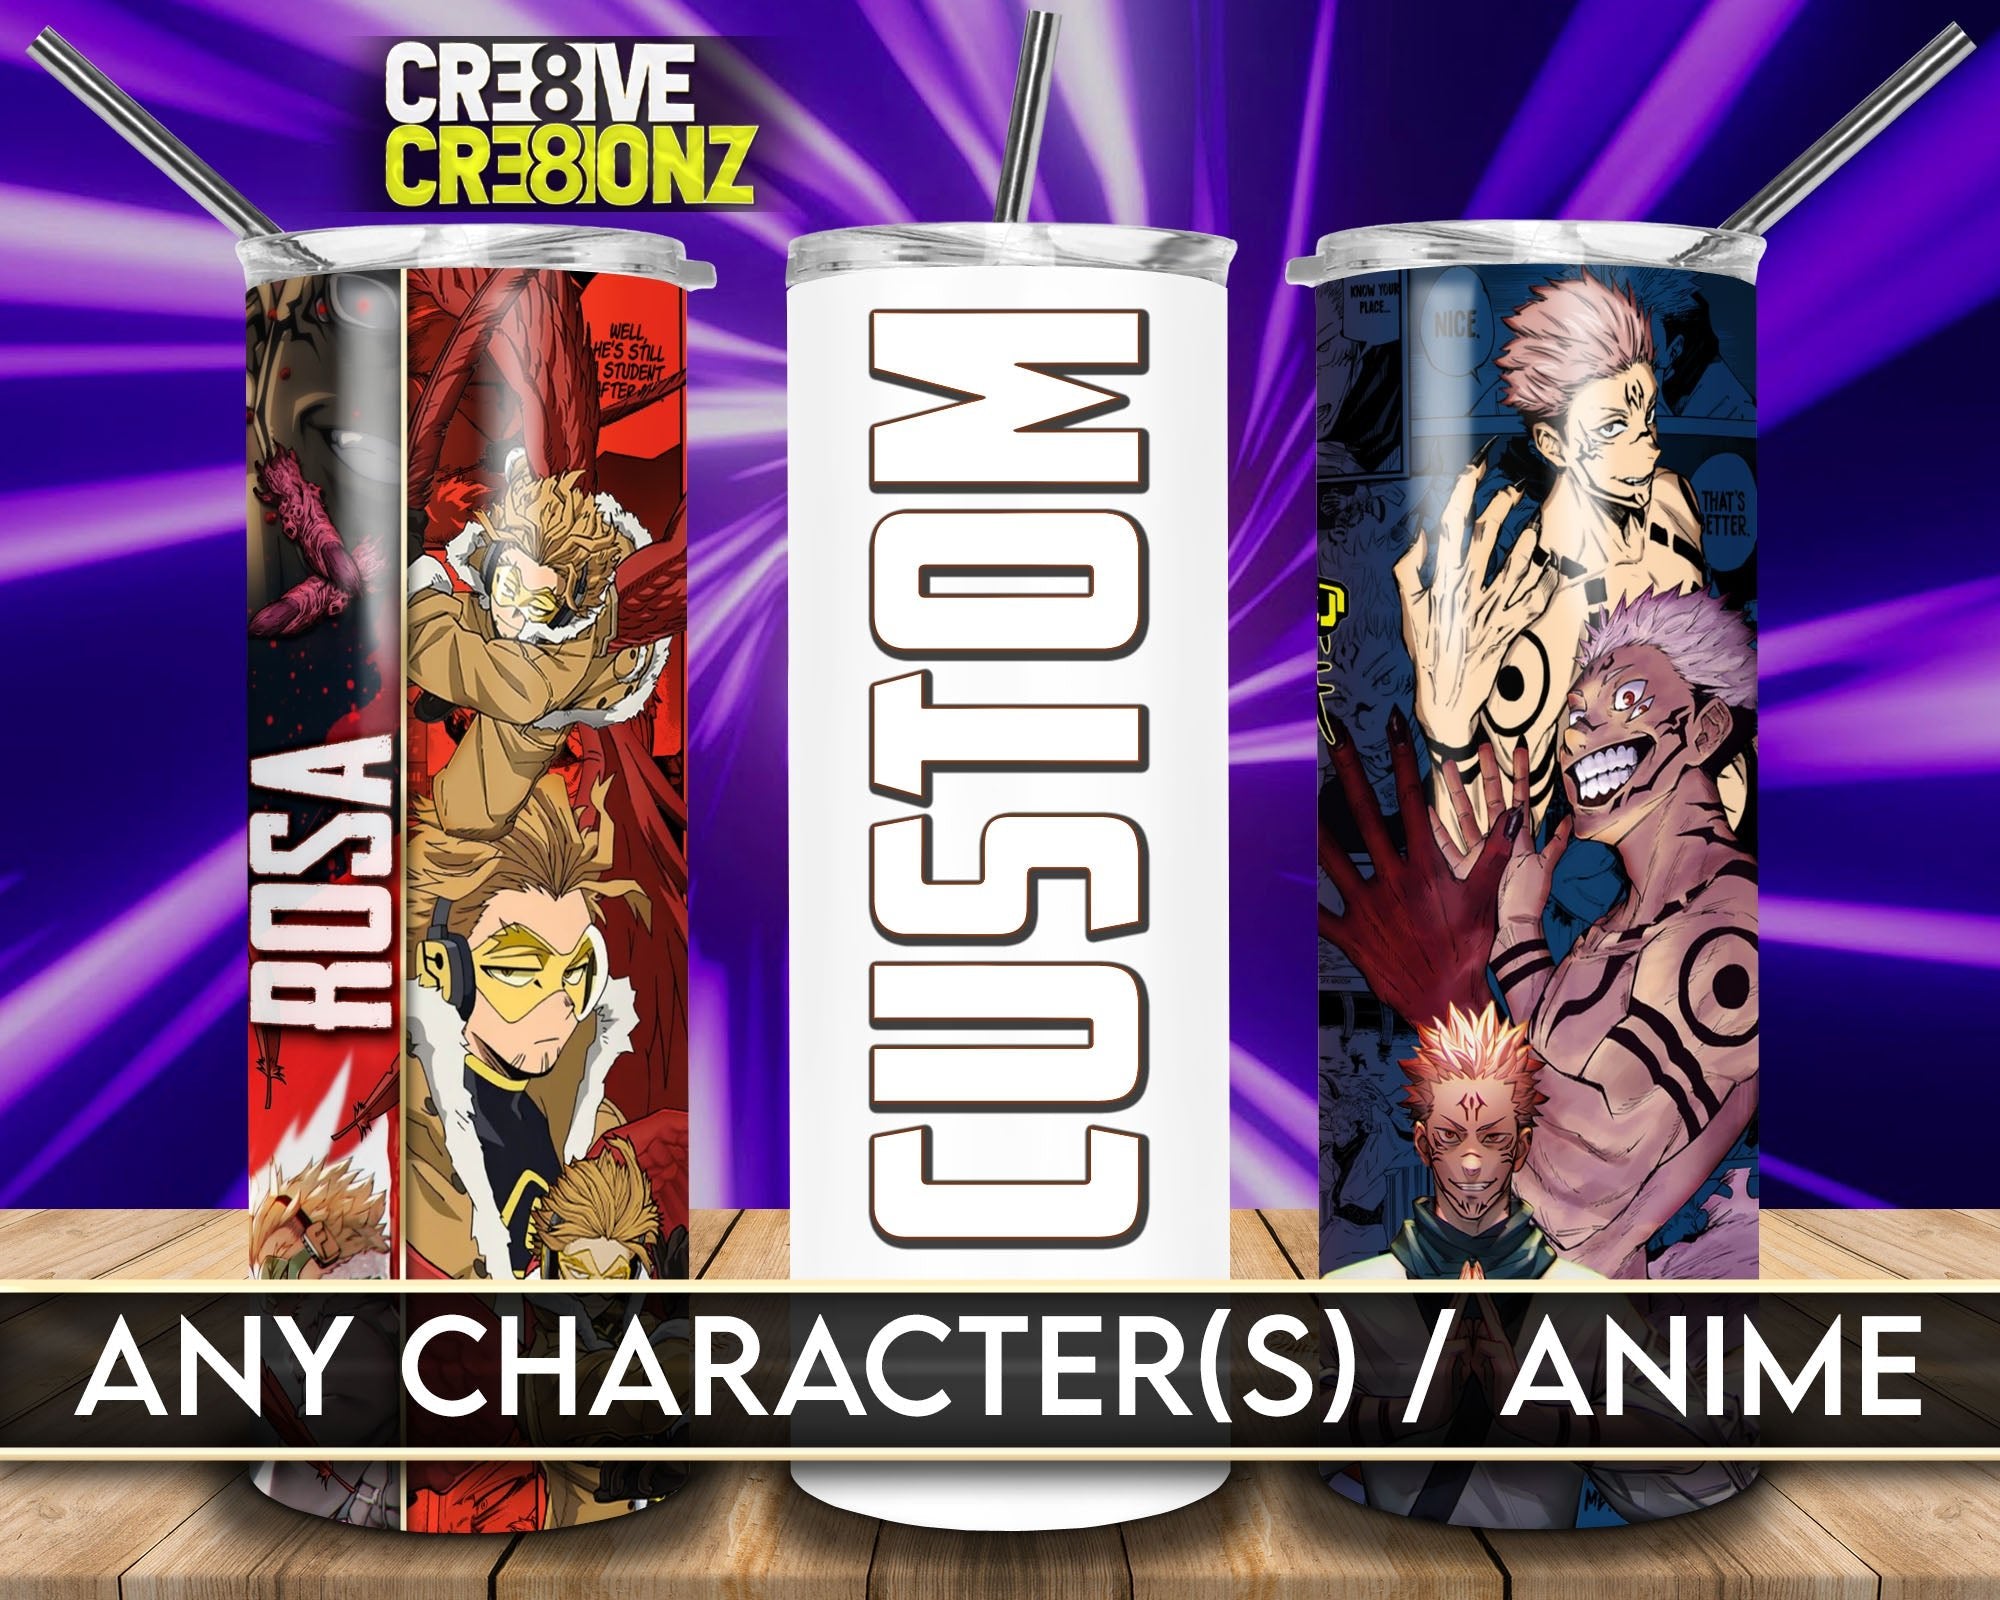 Draw anime style custom characters, costume design, oc art by Drlnglucy |  Fiverr